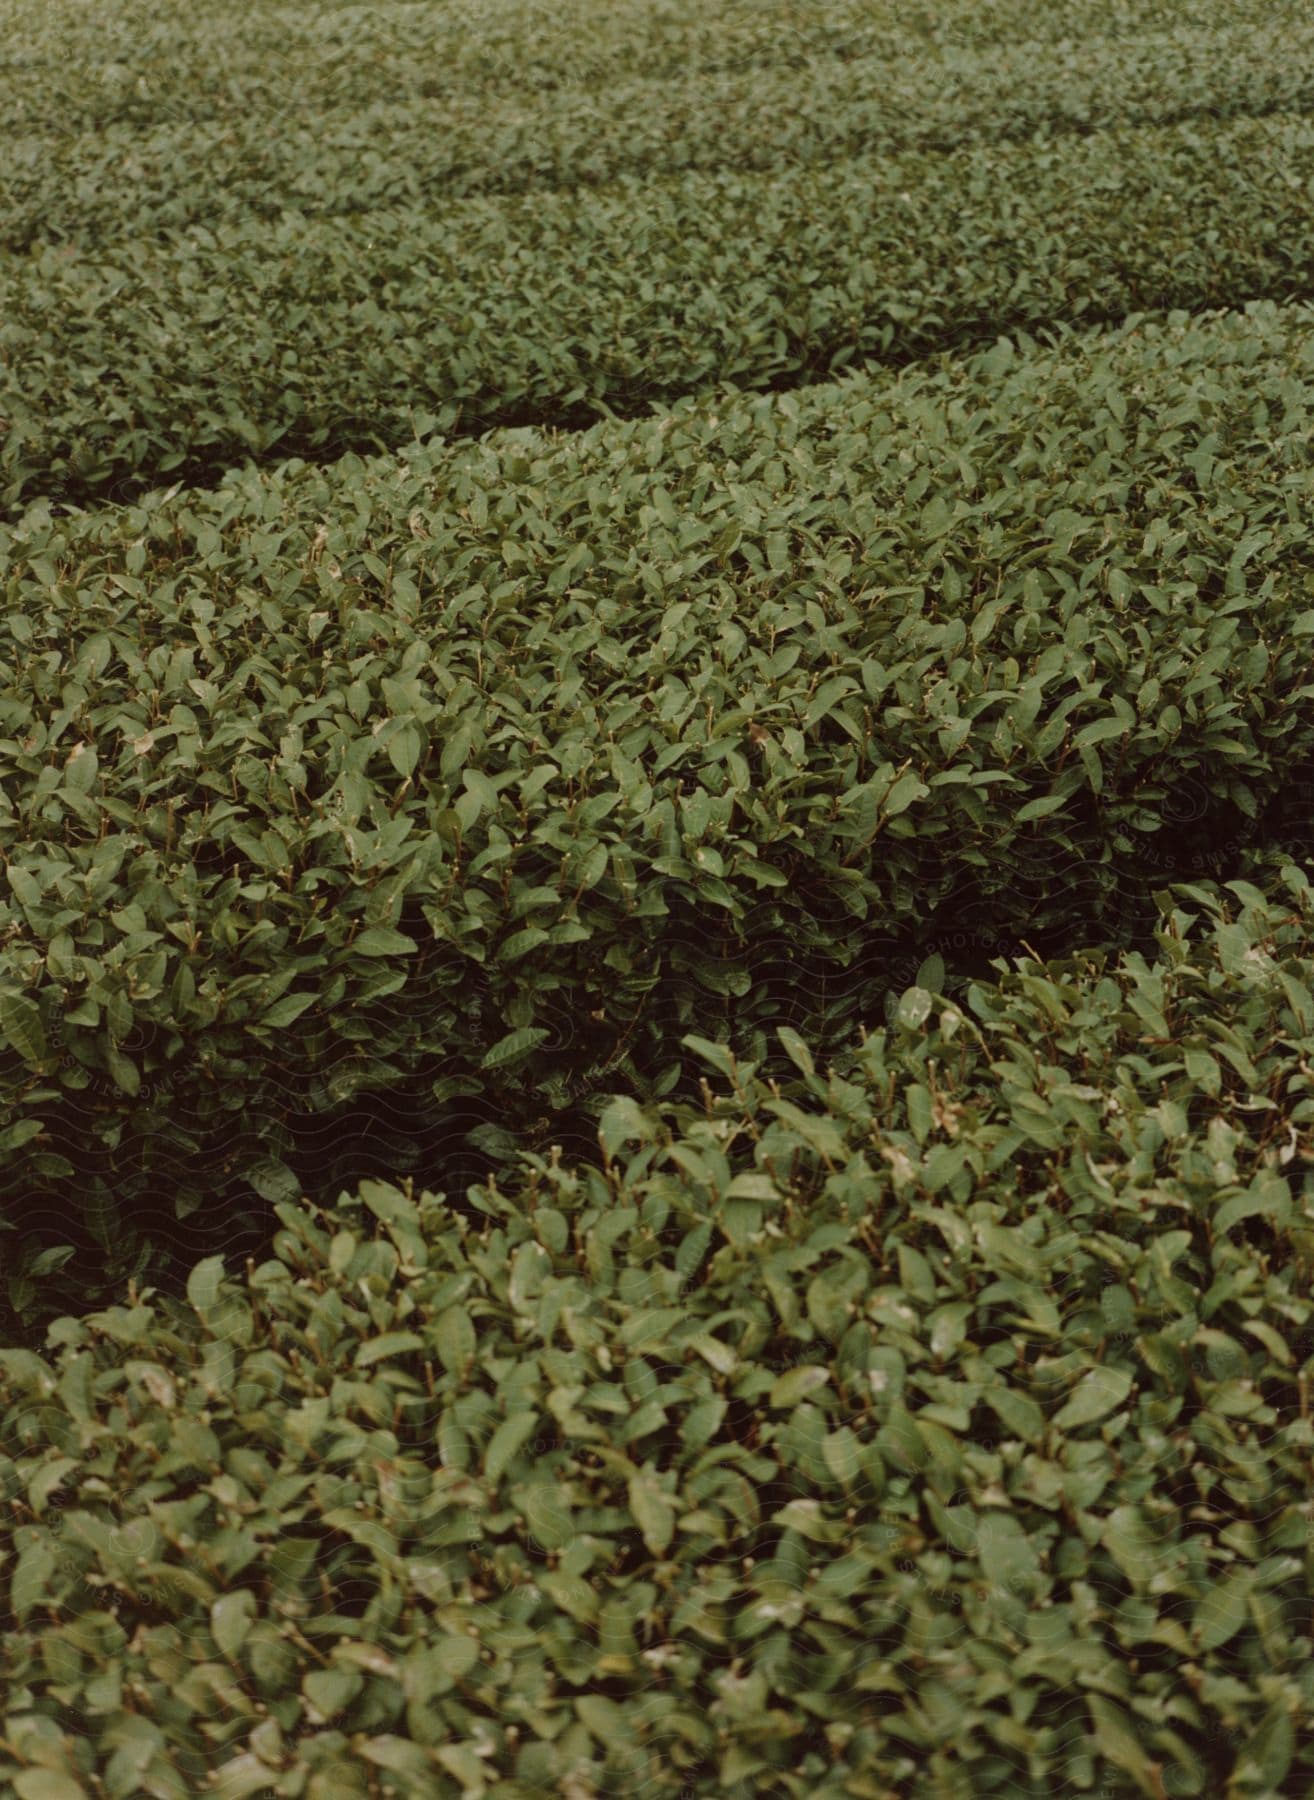 Large rows of green foliage are growing in an agricultural field.